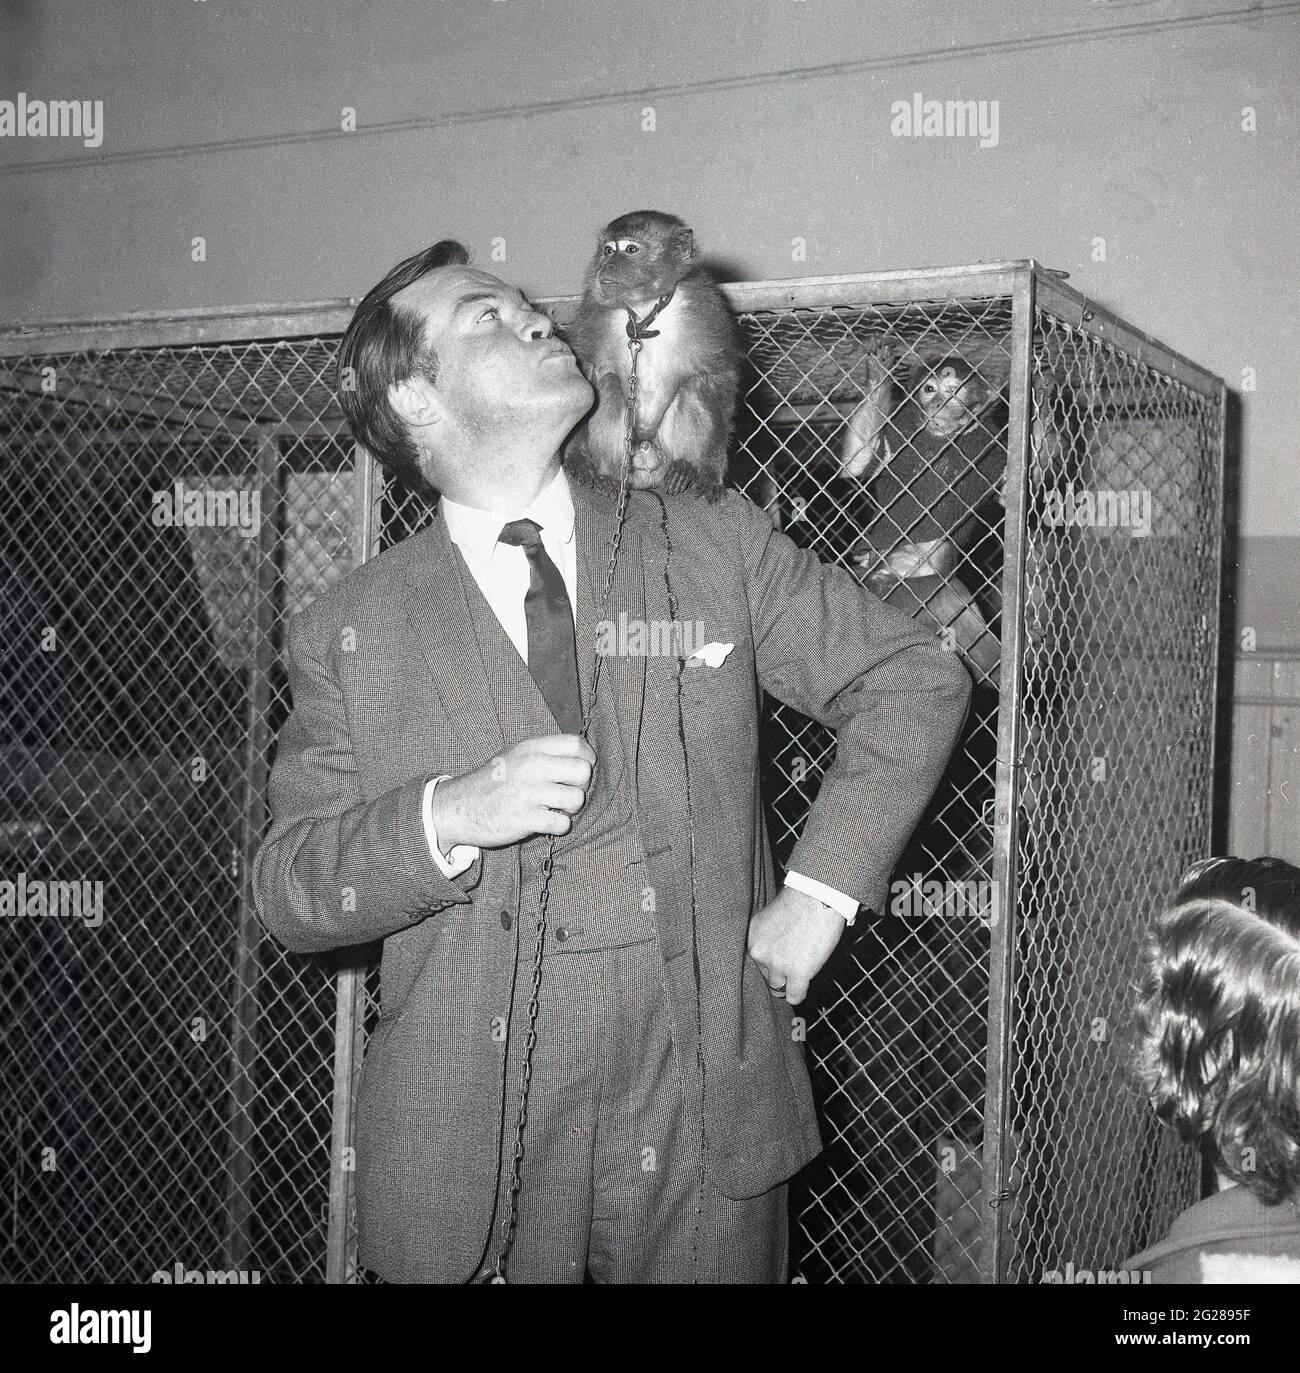 1960s, historical, infront of a metal cage, a well dressed man in a three piece check patterned suit with a small monkey on his shoulder, Scotland, UK. In the cage there is another small monkey. The man in the smart suit is Bill Tennent, a leading personality in the early years of Scottish Television. He appeared in many programmes, including those on religion, education and documentaries. In addition, several chat shows were built around him, including The Bill Tennent Show and Time Out With Tennent. Stock Photo